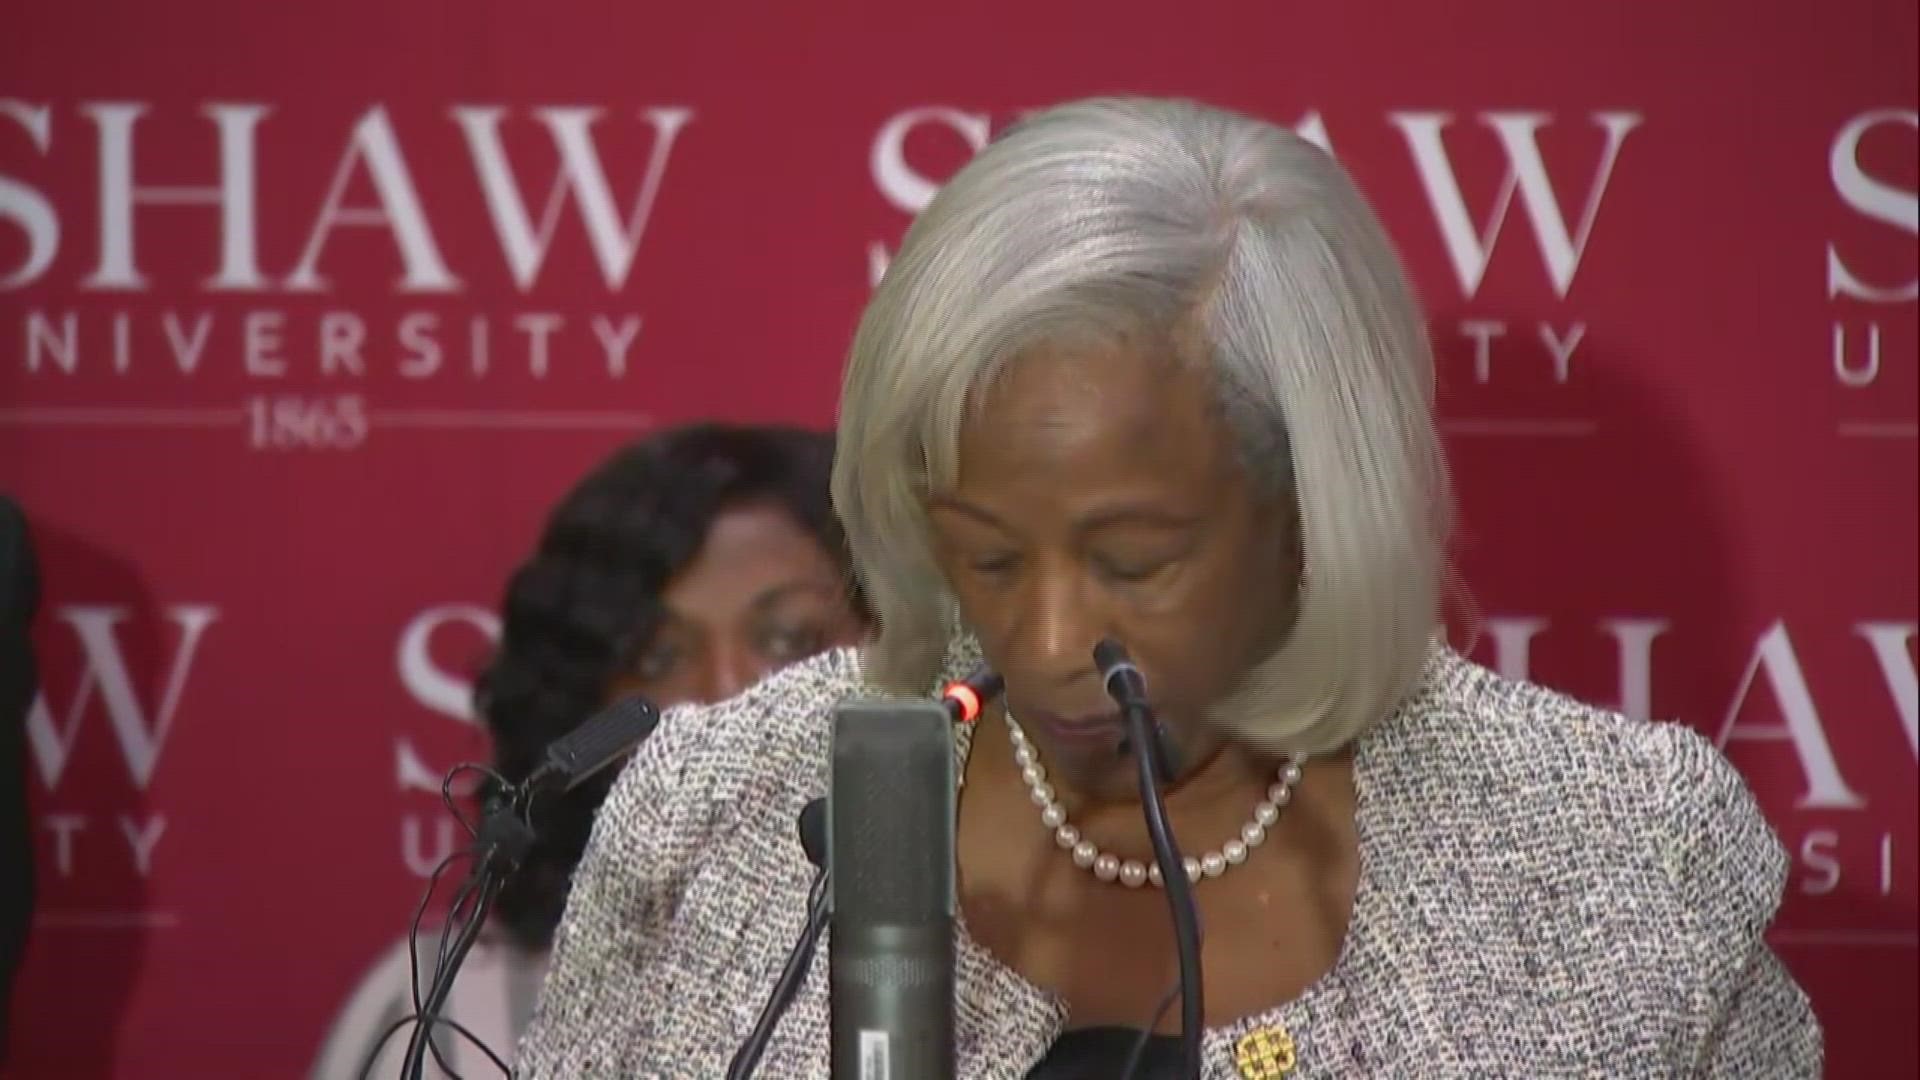 Shaw University President Paulette Dillard has accused law enforcement officers of racially profiling students traveling to a conference in Atlanta.